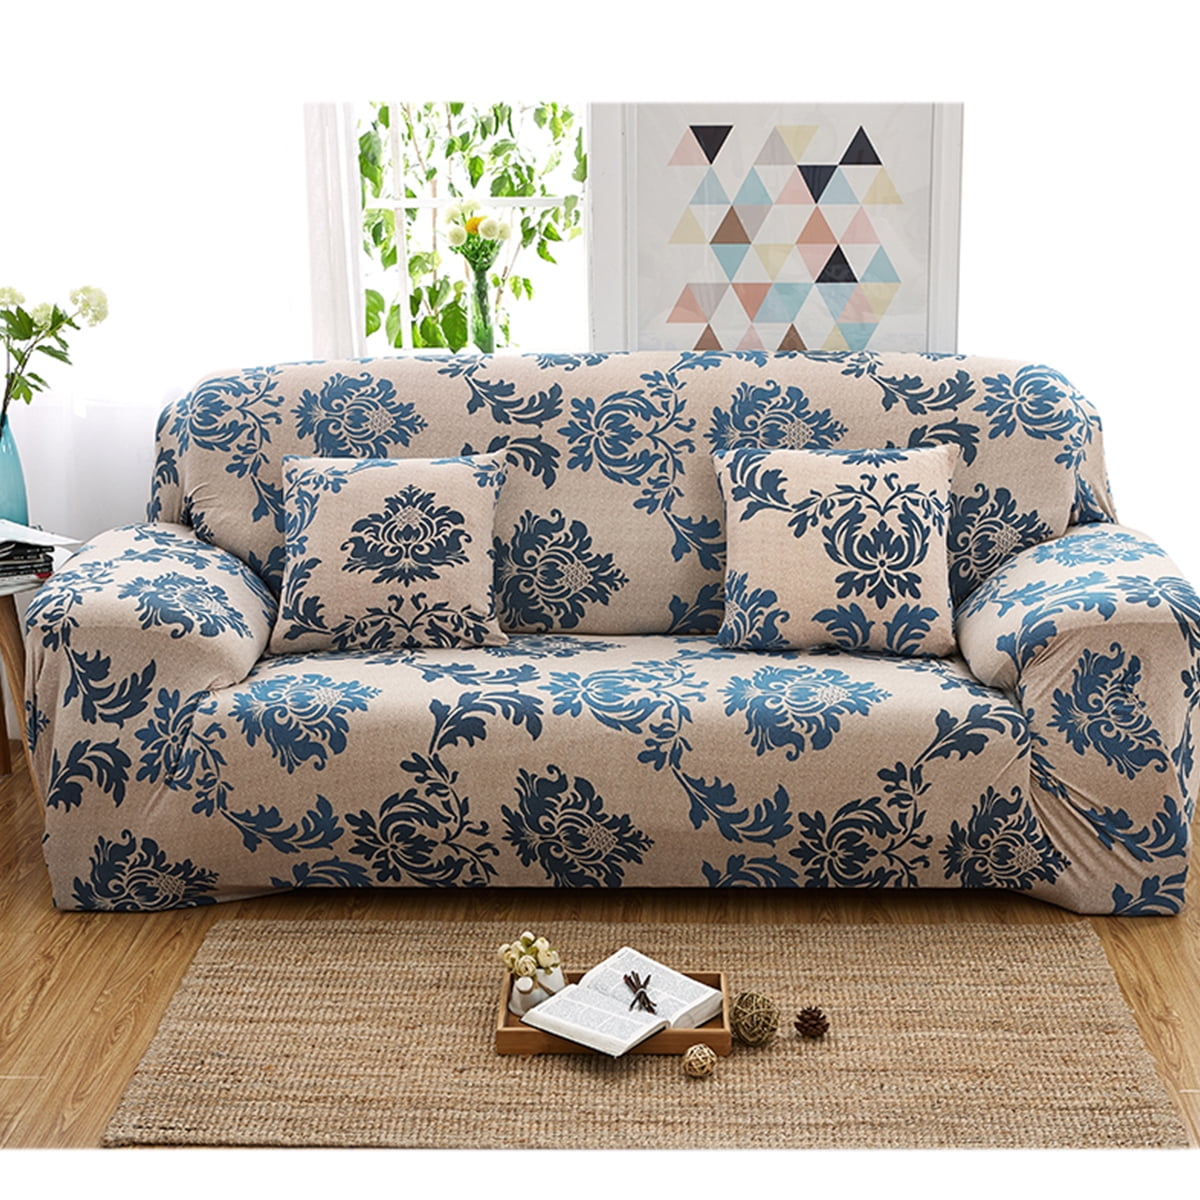 Details about   1-4Seater Replacement Stretch Sofa Seat Cushion Cover Couch Slipcover Protect US 